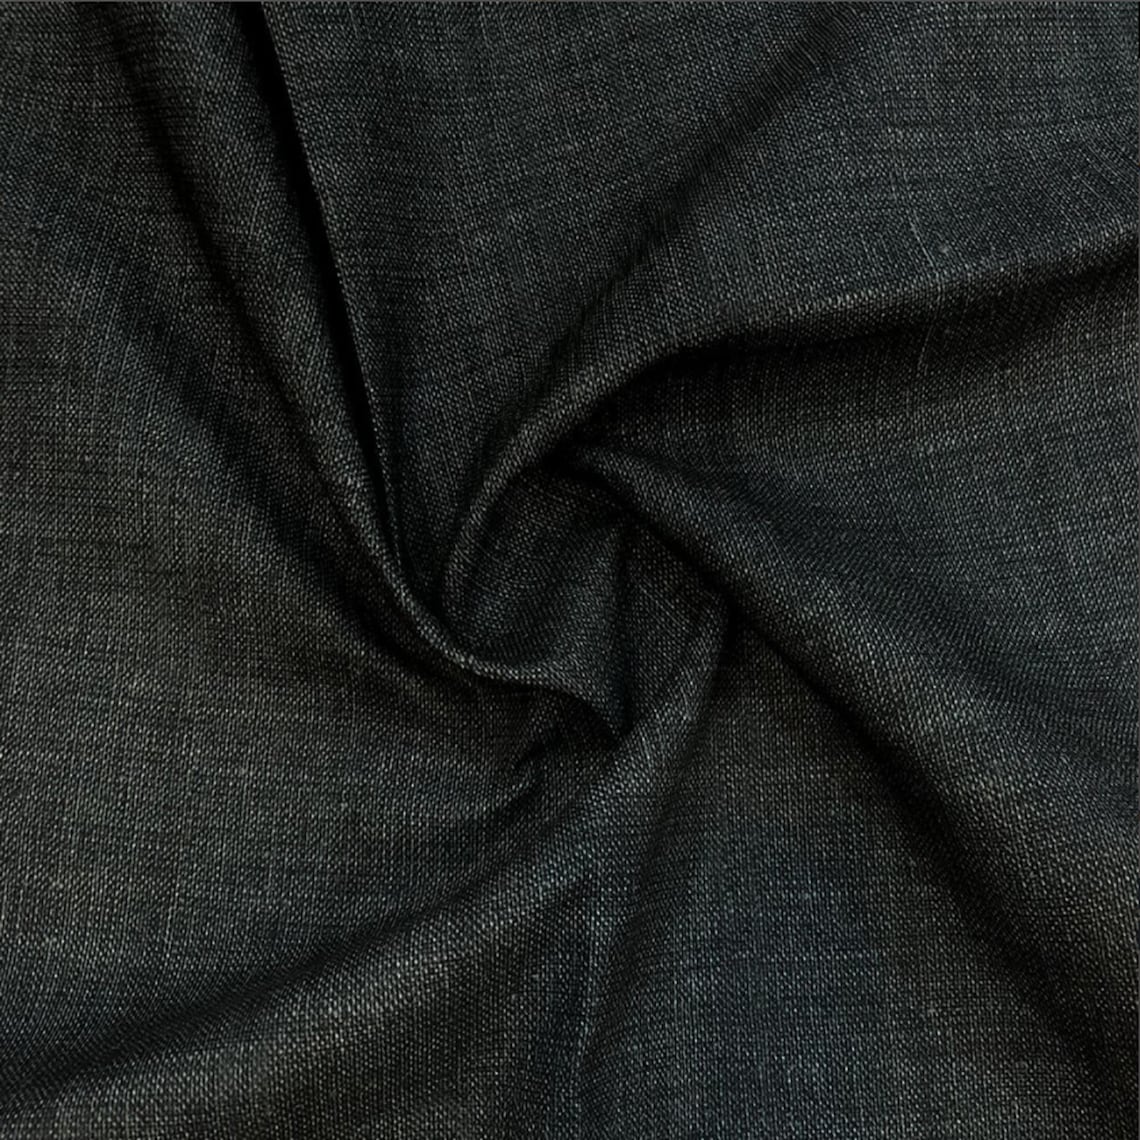 Anthracite Linen Effect Fabric Upholstery Fabric By The Yard | Etsy